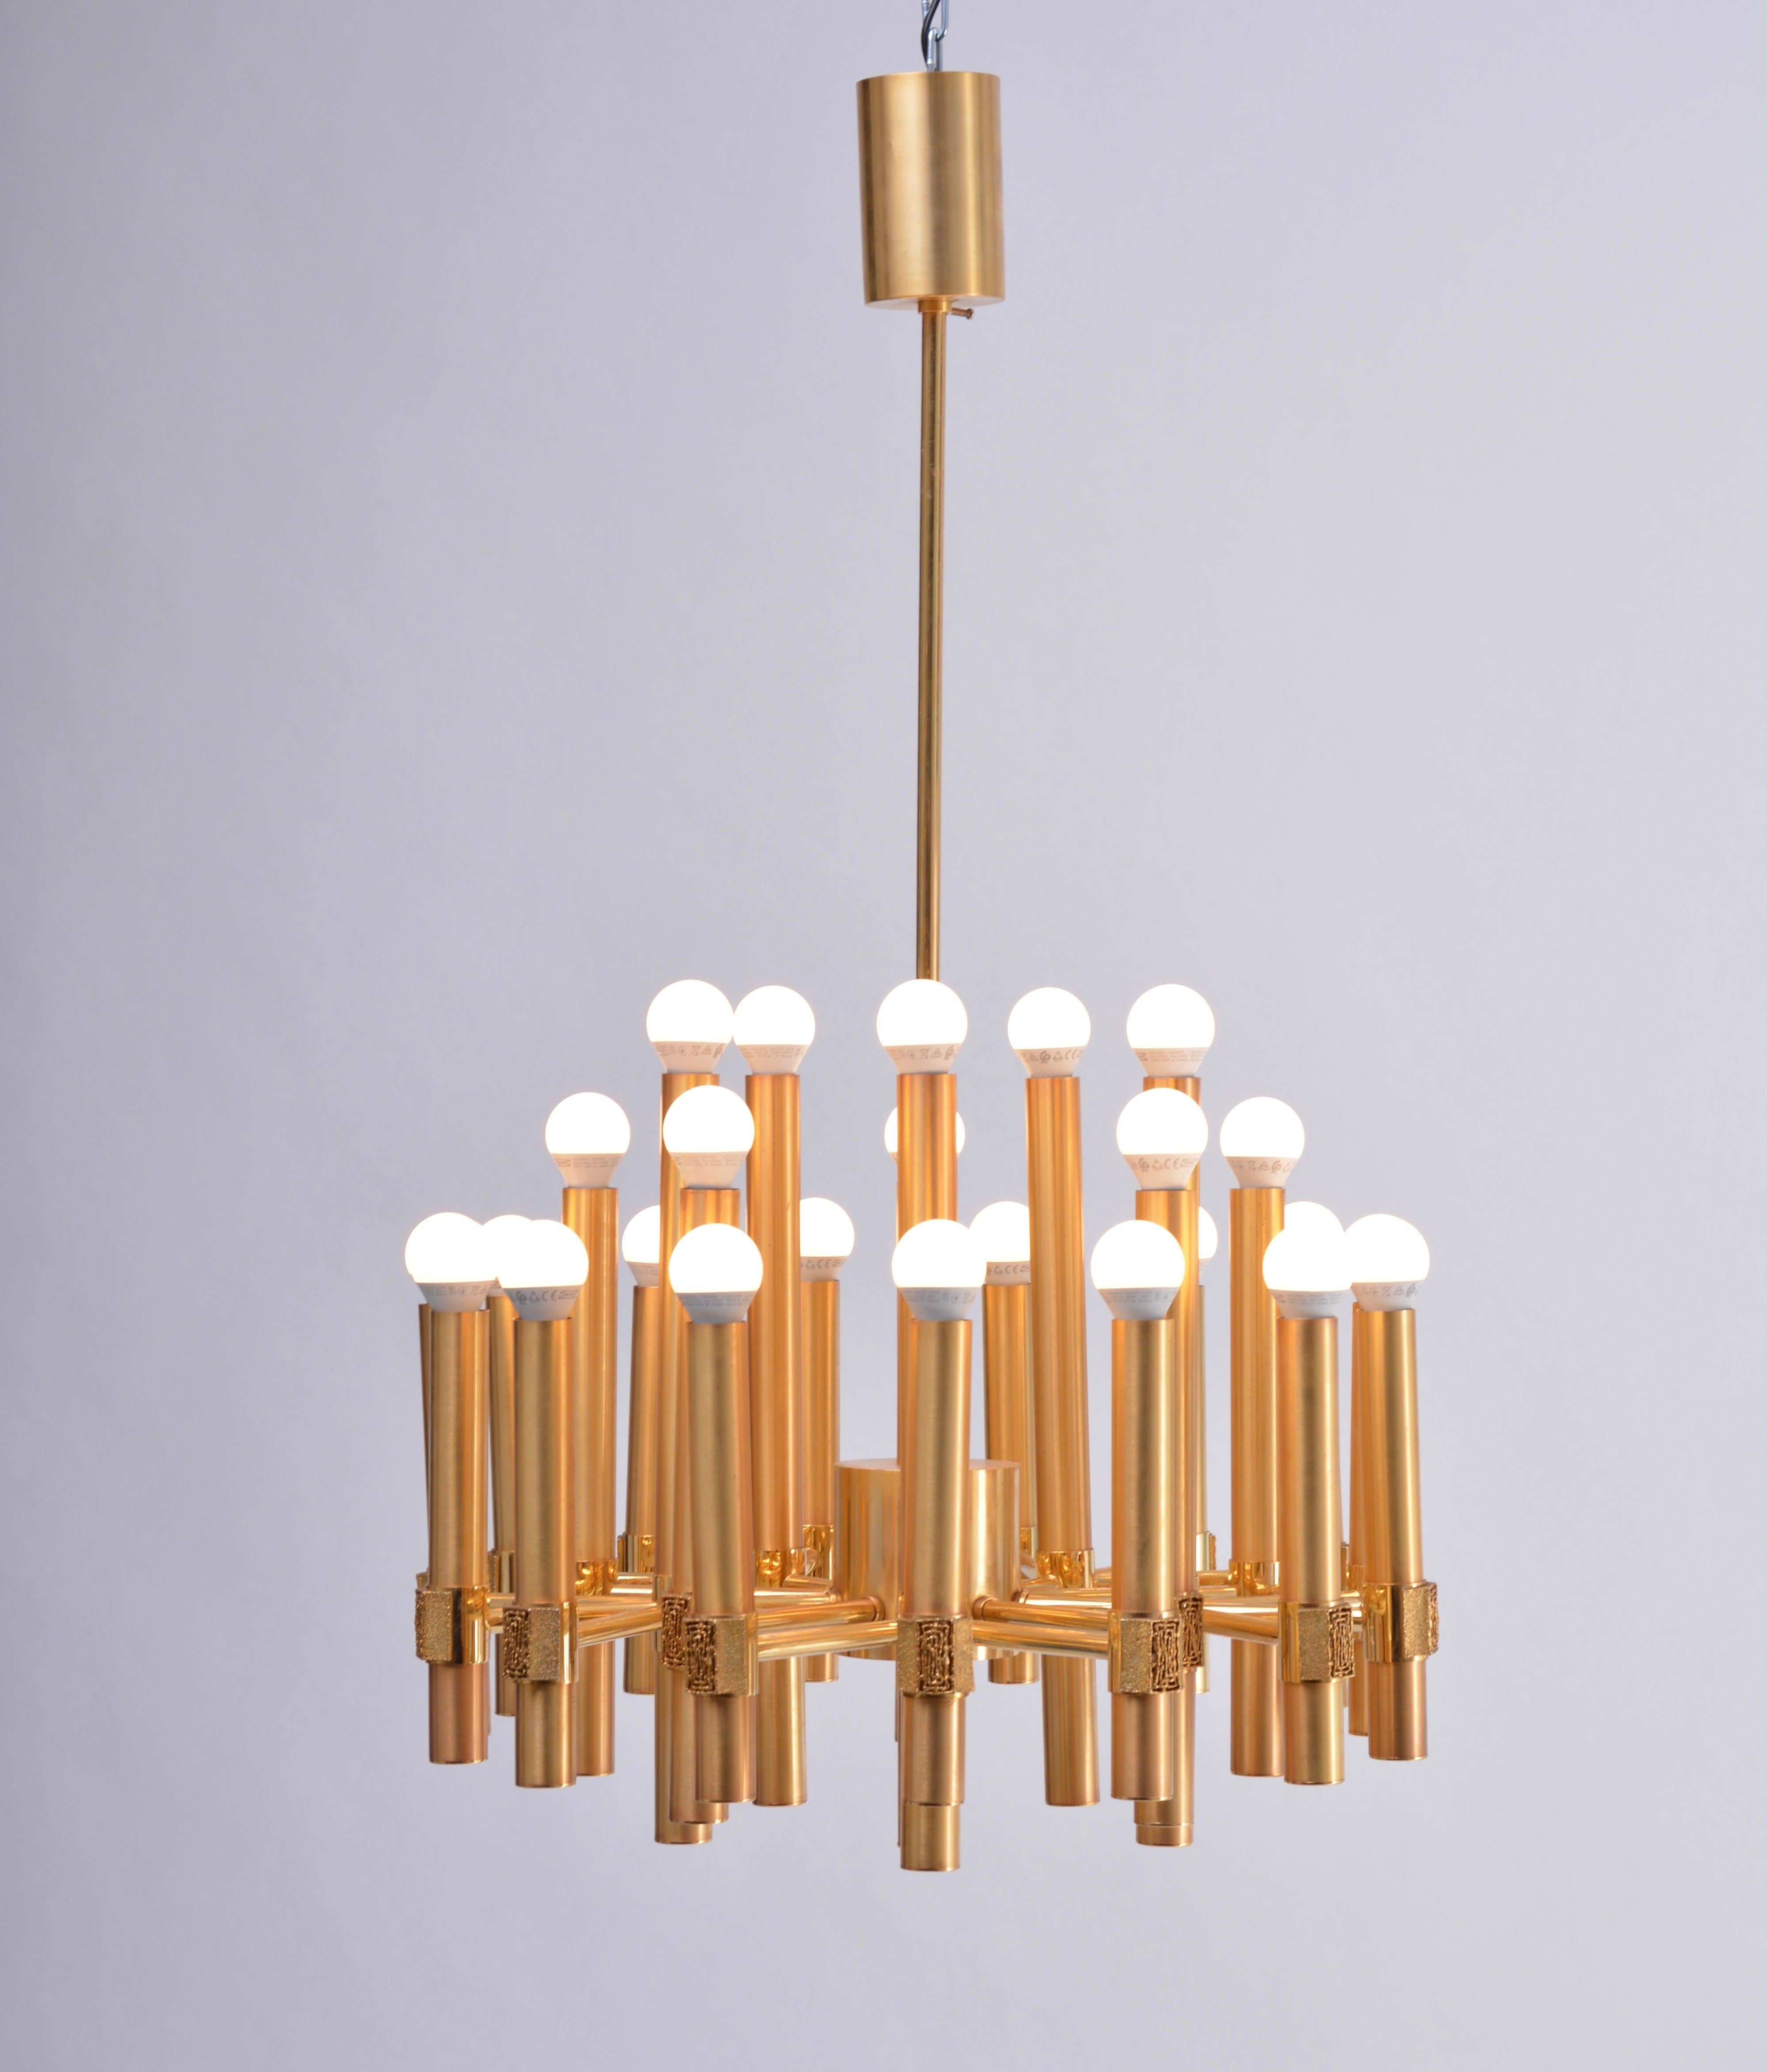 Gold colored Mid-Century Modern Chandelier by Angelo Brotto for Esperia Italia

This chandelier was designed by Angelo Brotto and produced by Italian lighting company Esperia. The chandelier is made of brass anodized aluminium. It has twenty arms